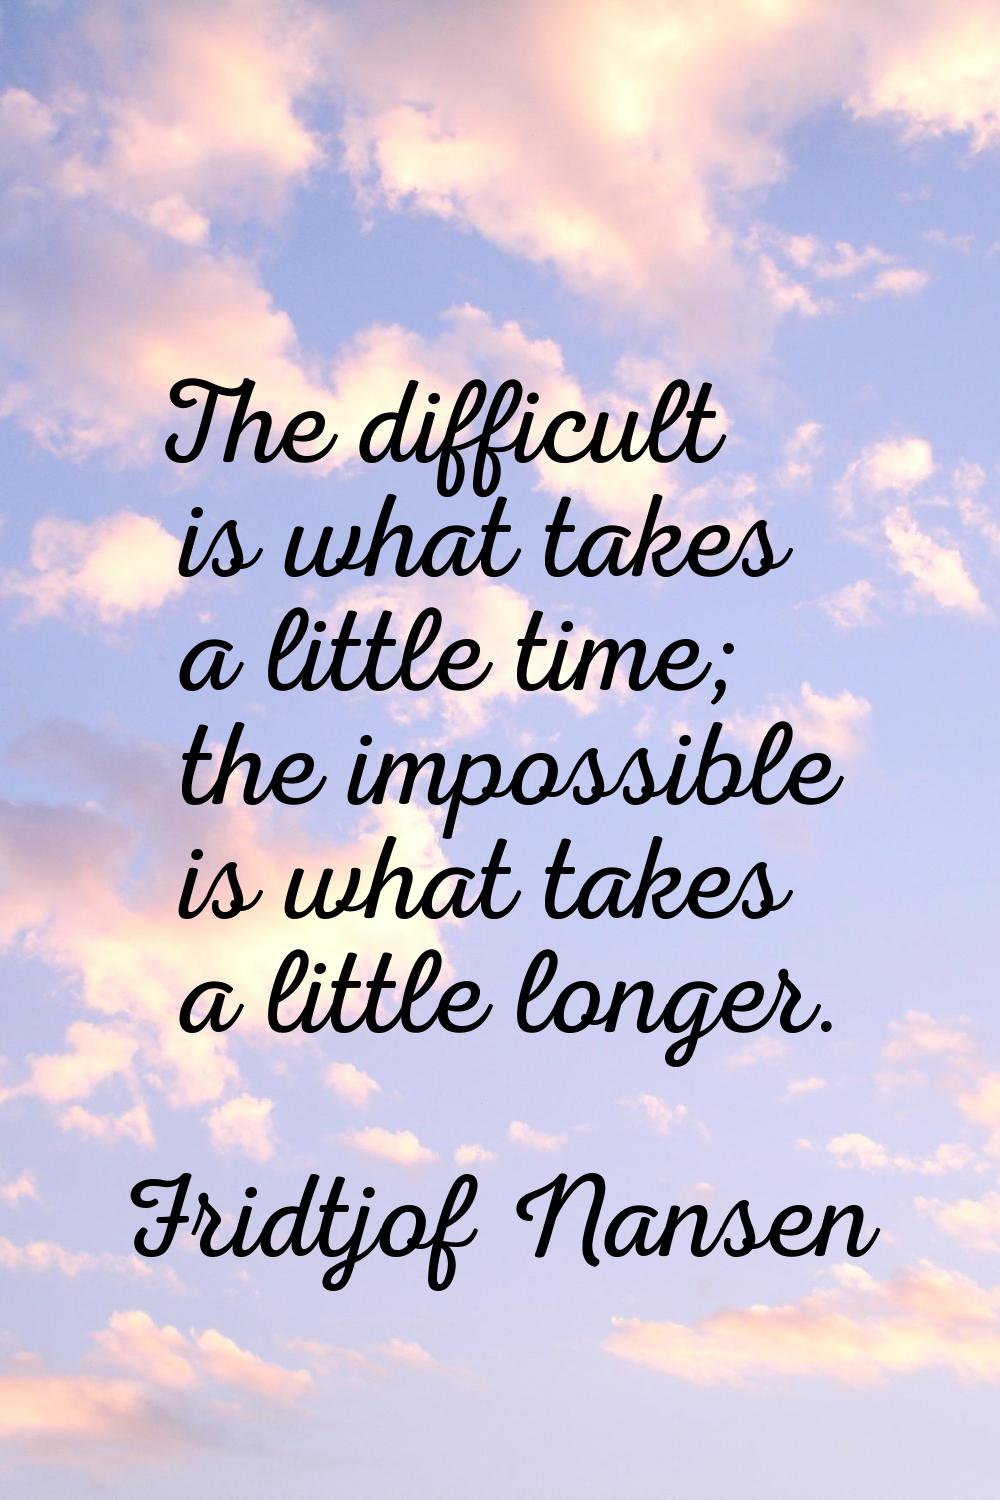 The difficult is what takes a little time; the impossible is what takes a little longer.